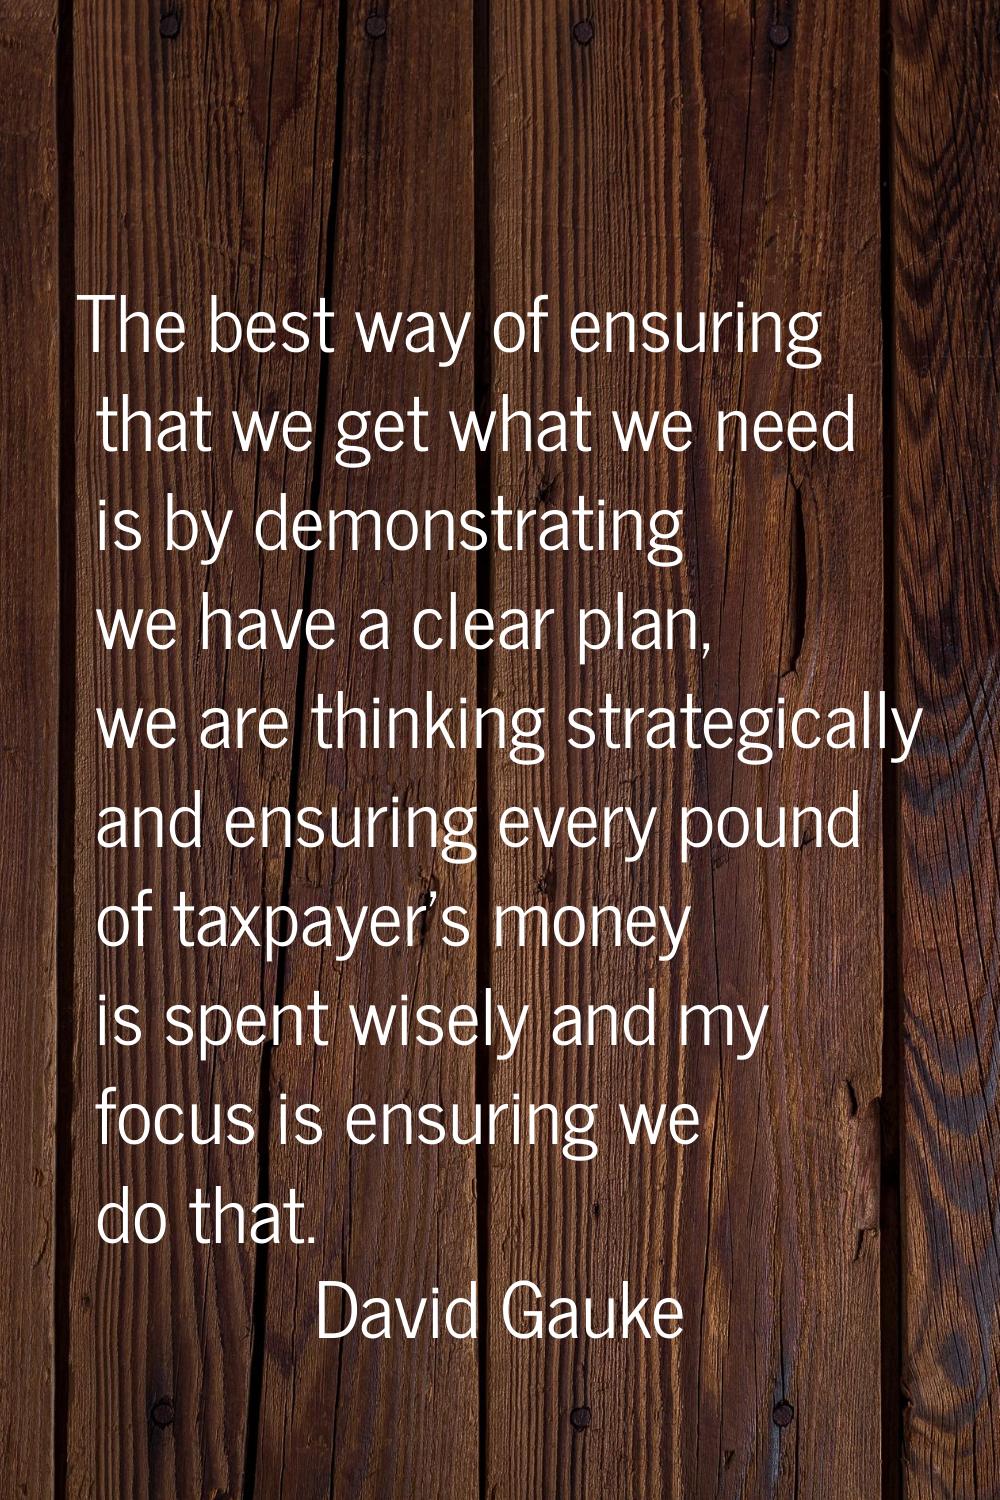 The best way of ensuring that we get what we need is by demonstrating we have a clear plan, we are 